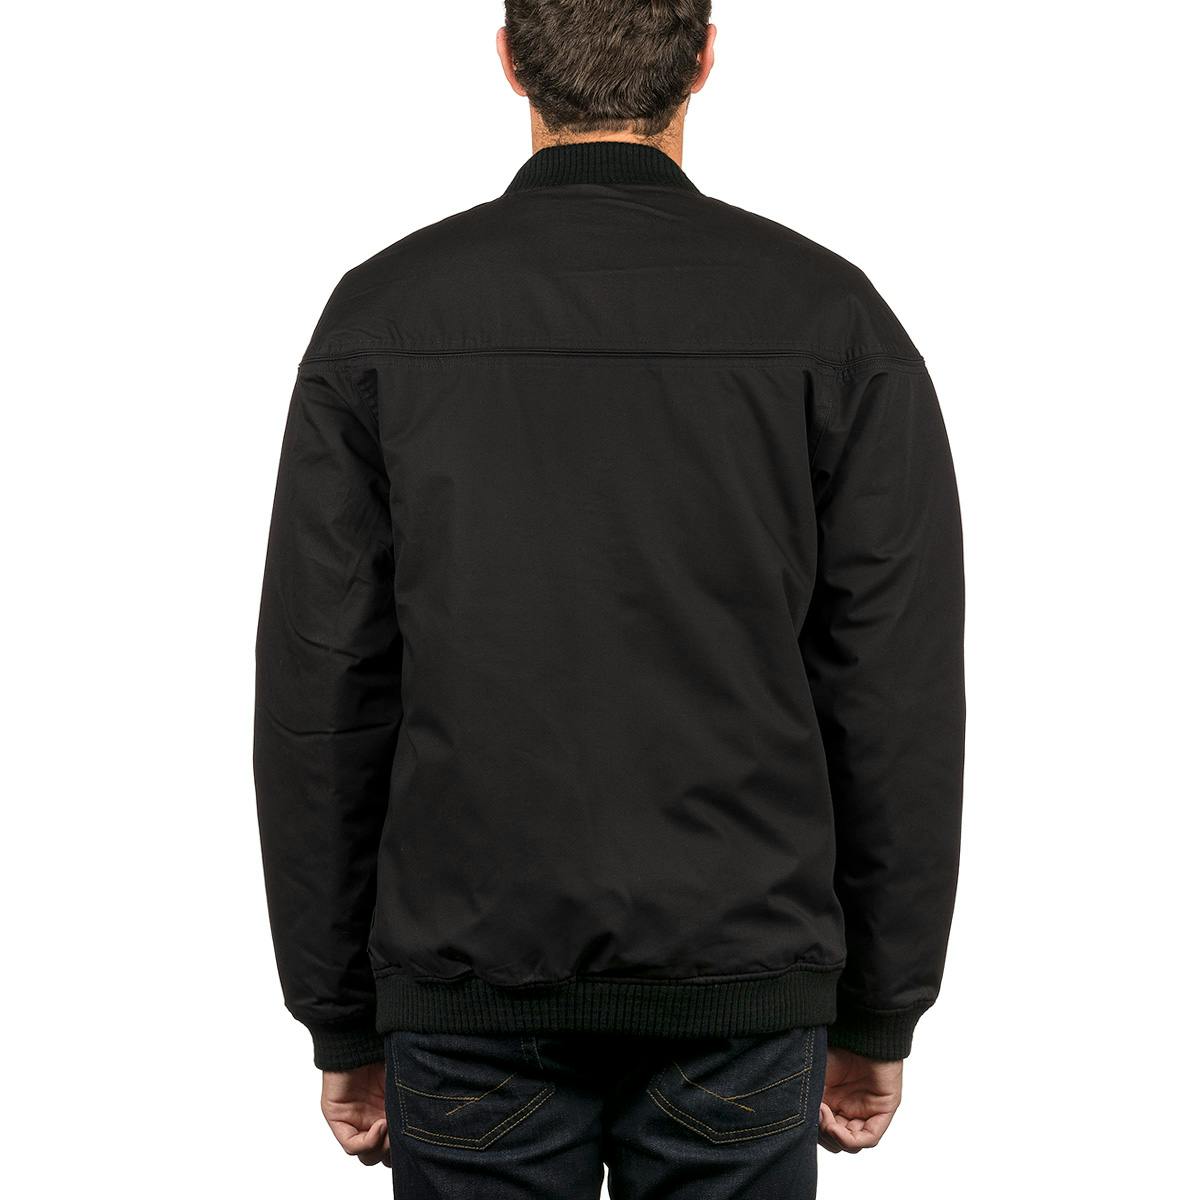 33% off on Men's Fast Jacket | OneDayOnly